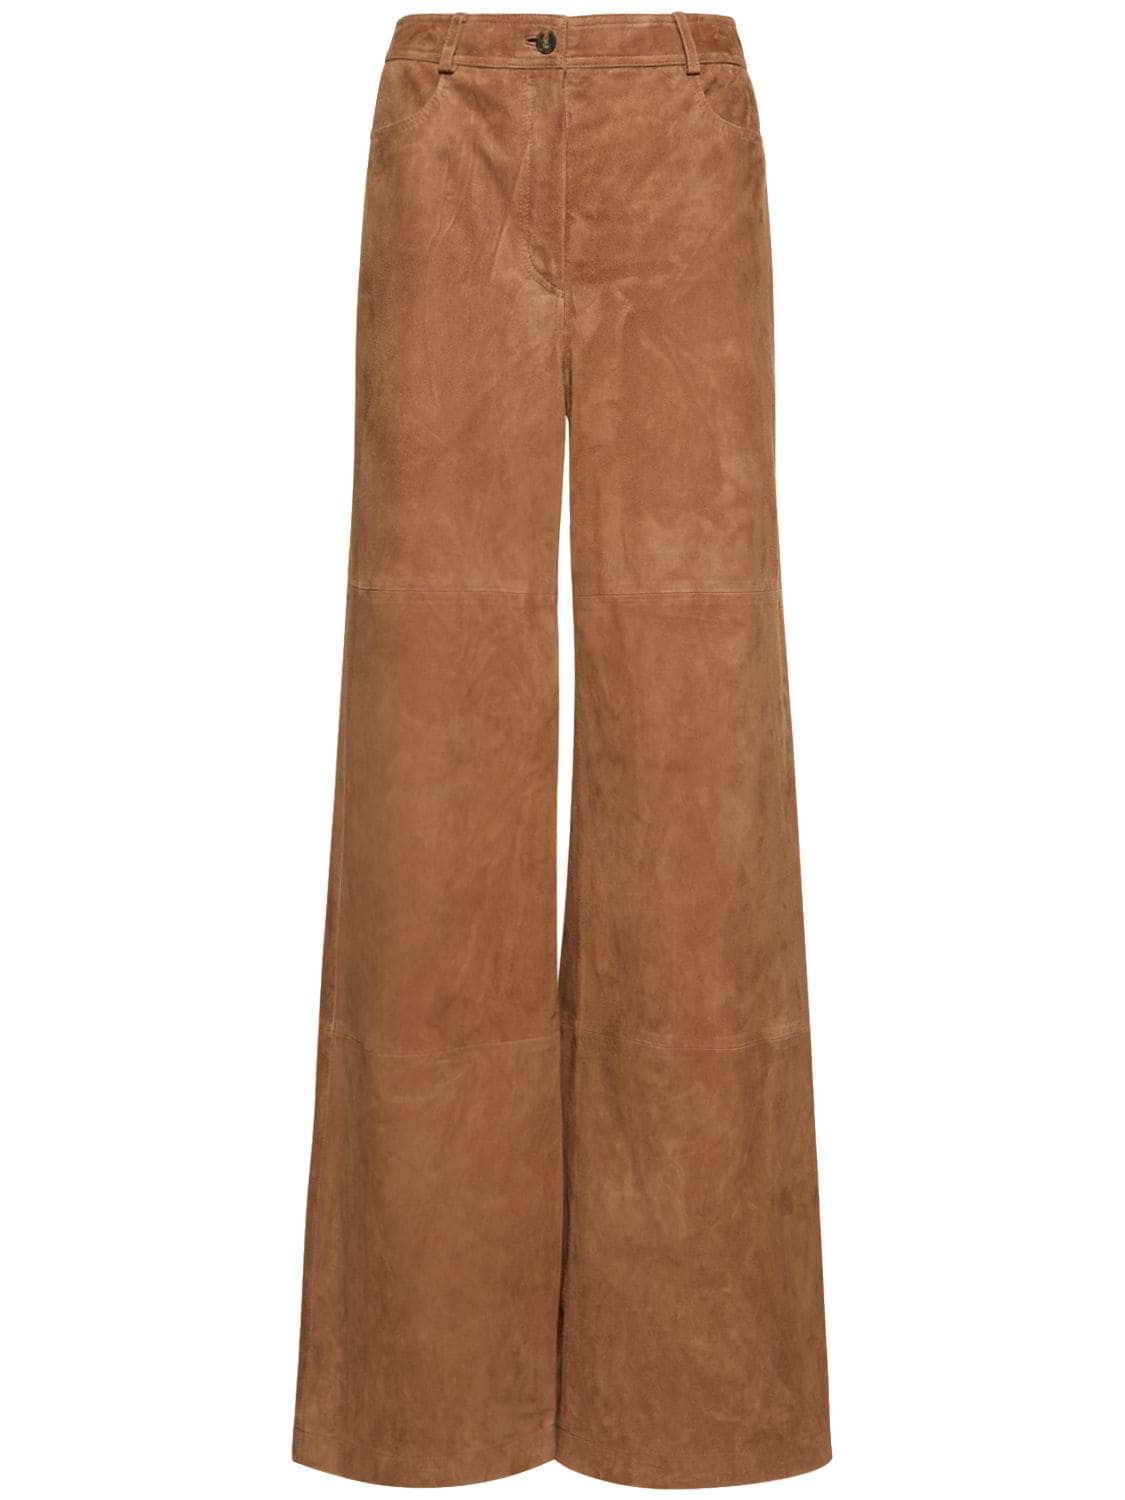 Image of Suede Leather High Rise Wide Pants